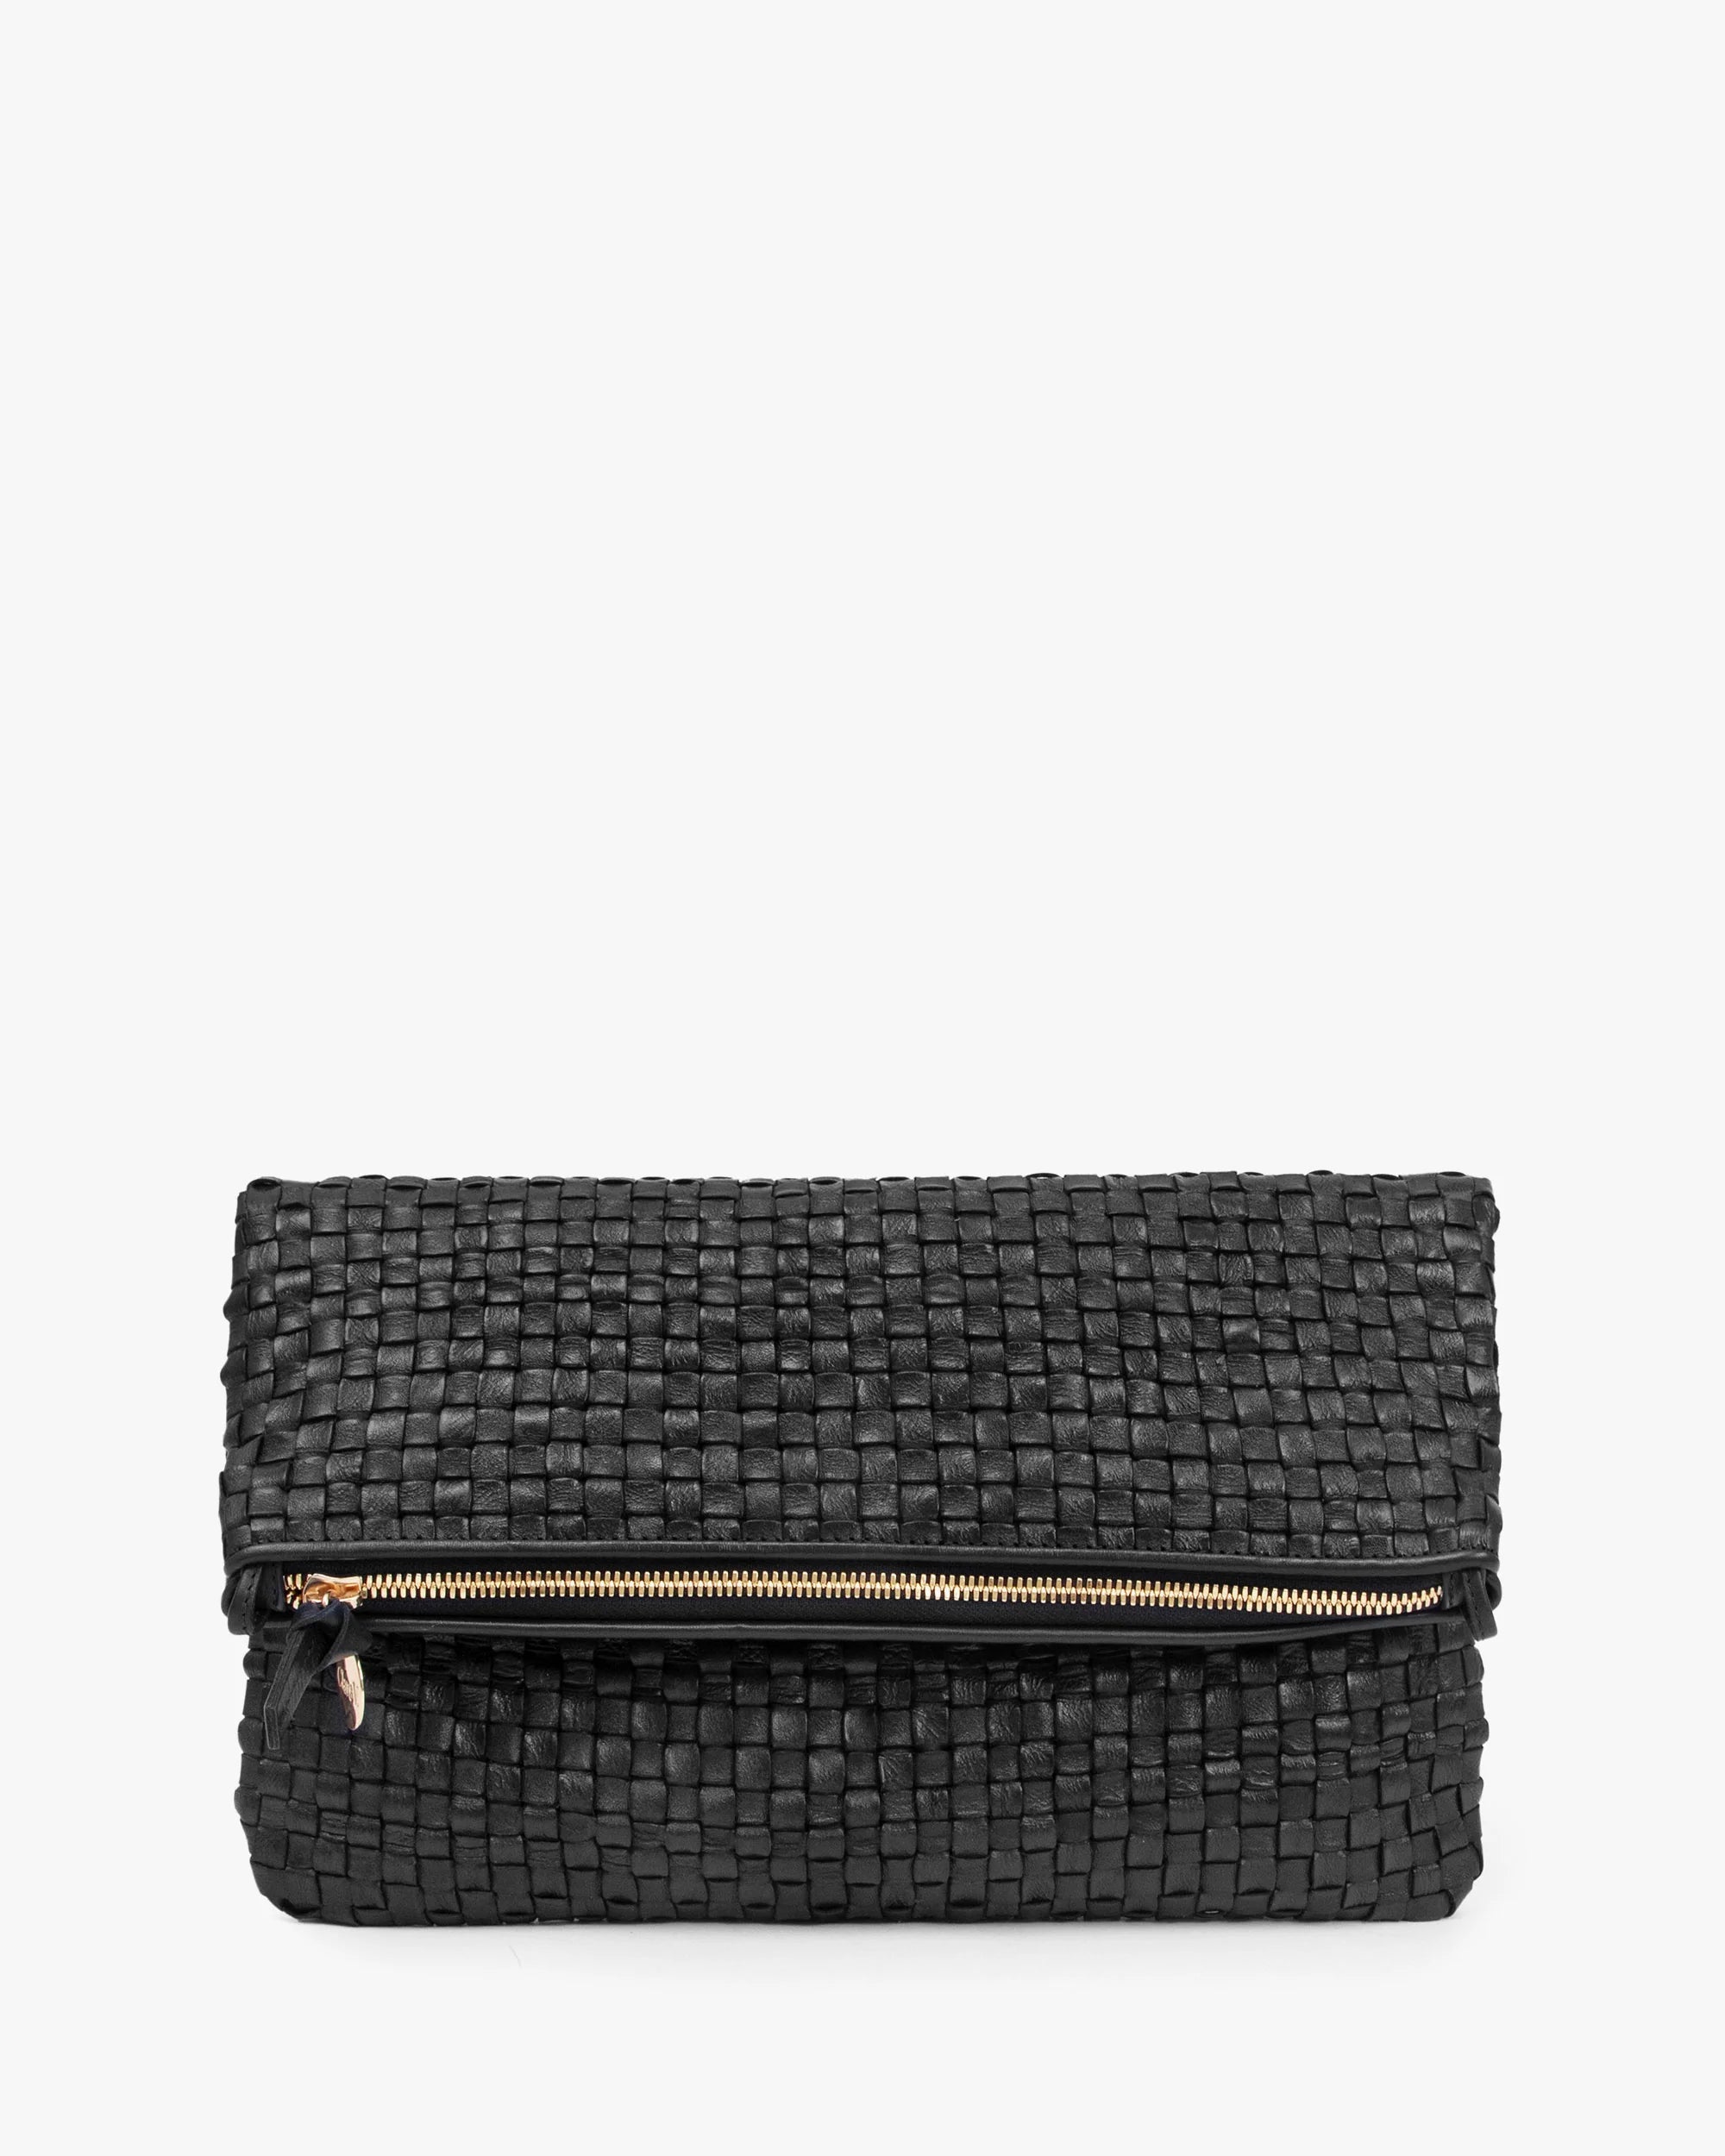 Foldover Clutch with Tabs in Black Woven Checker